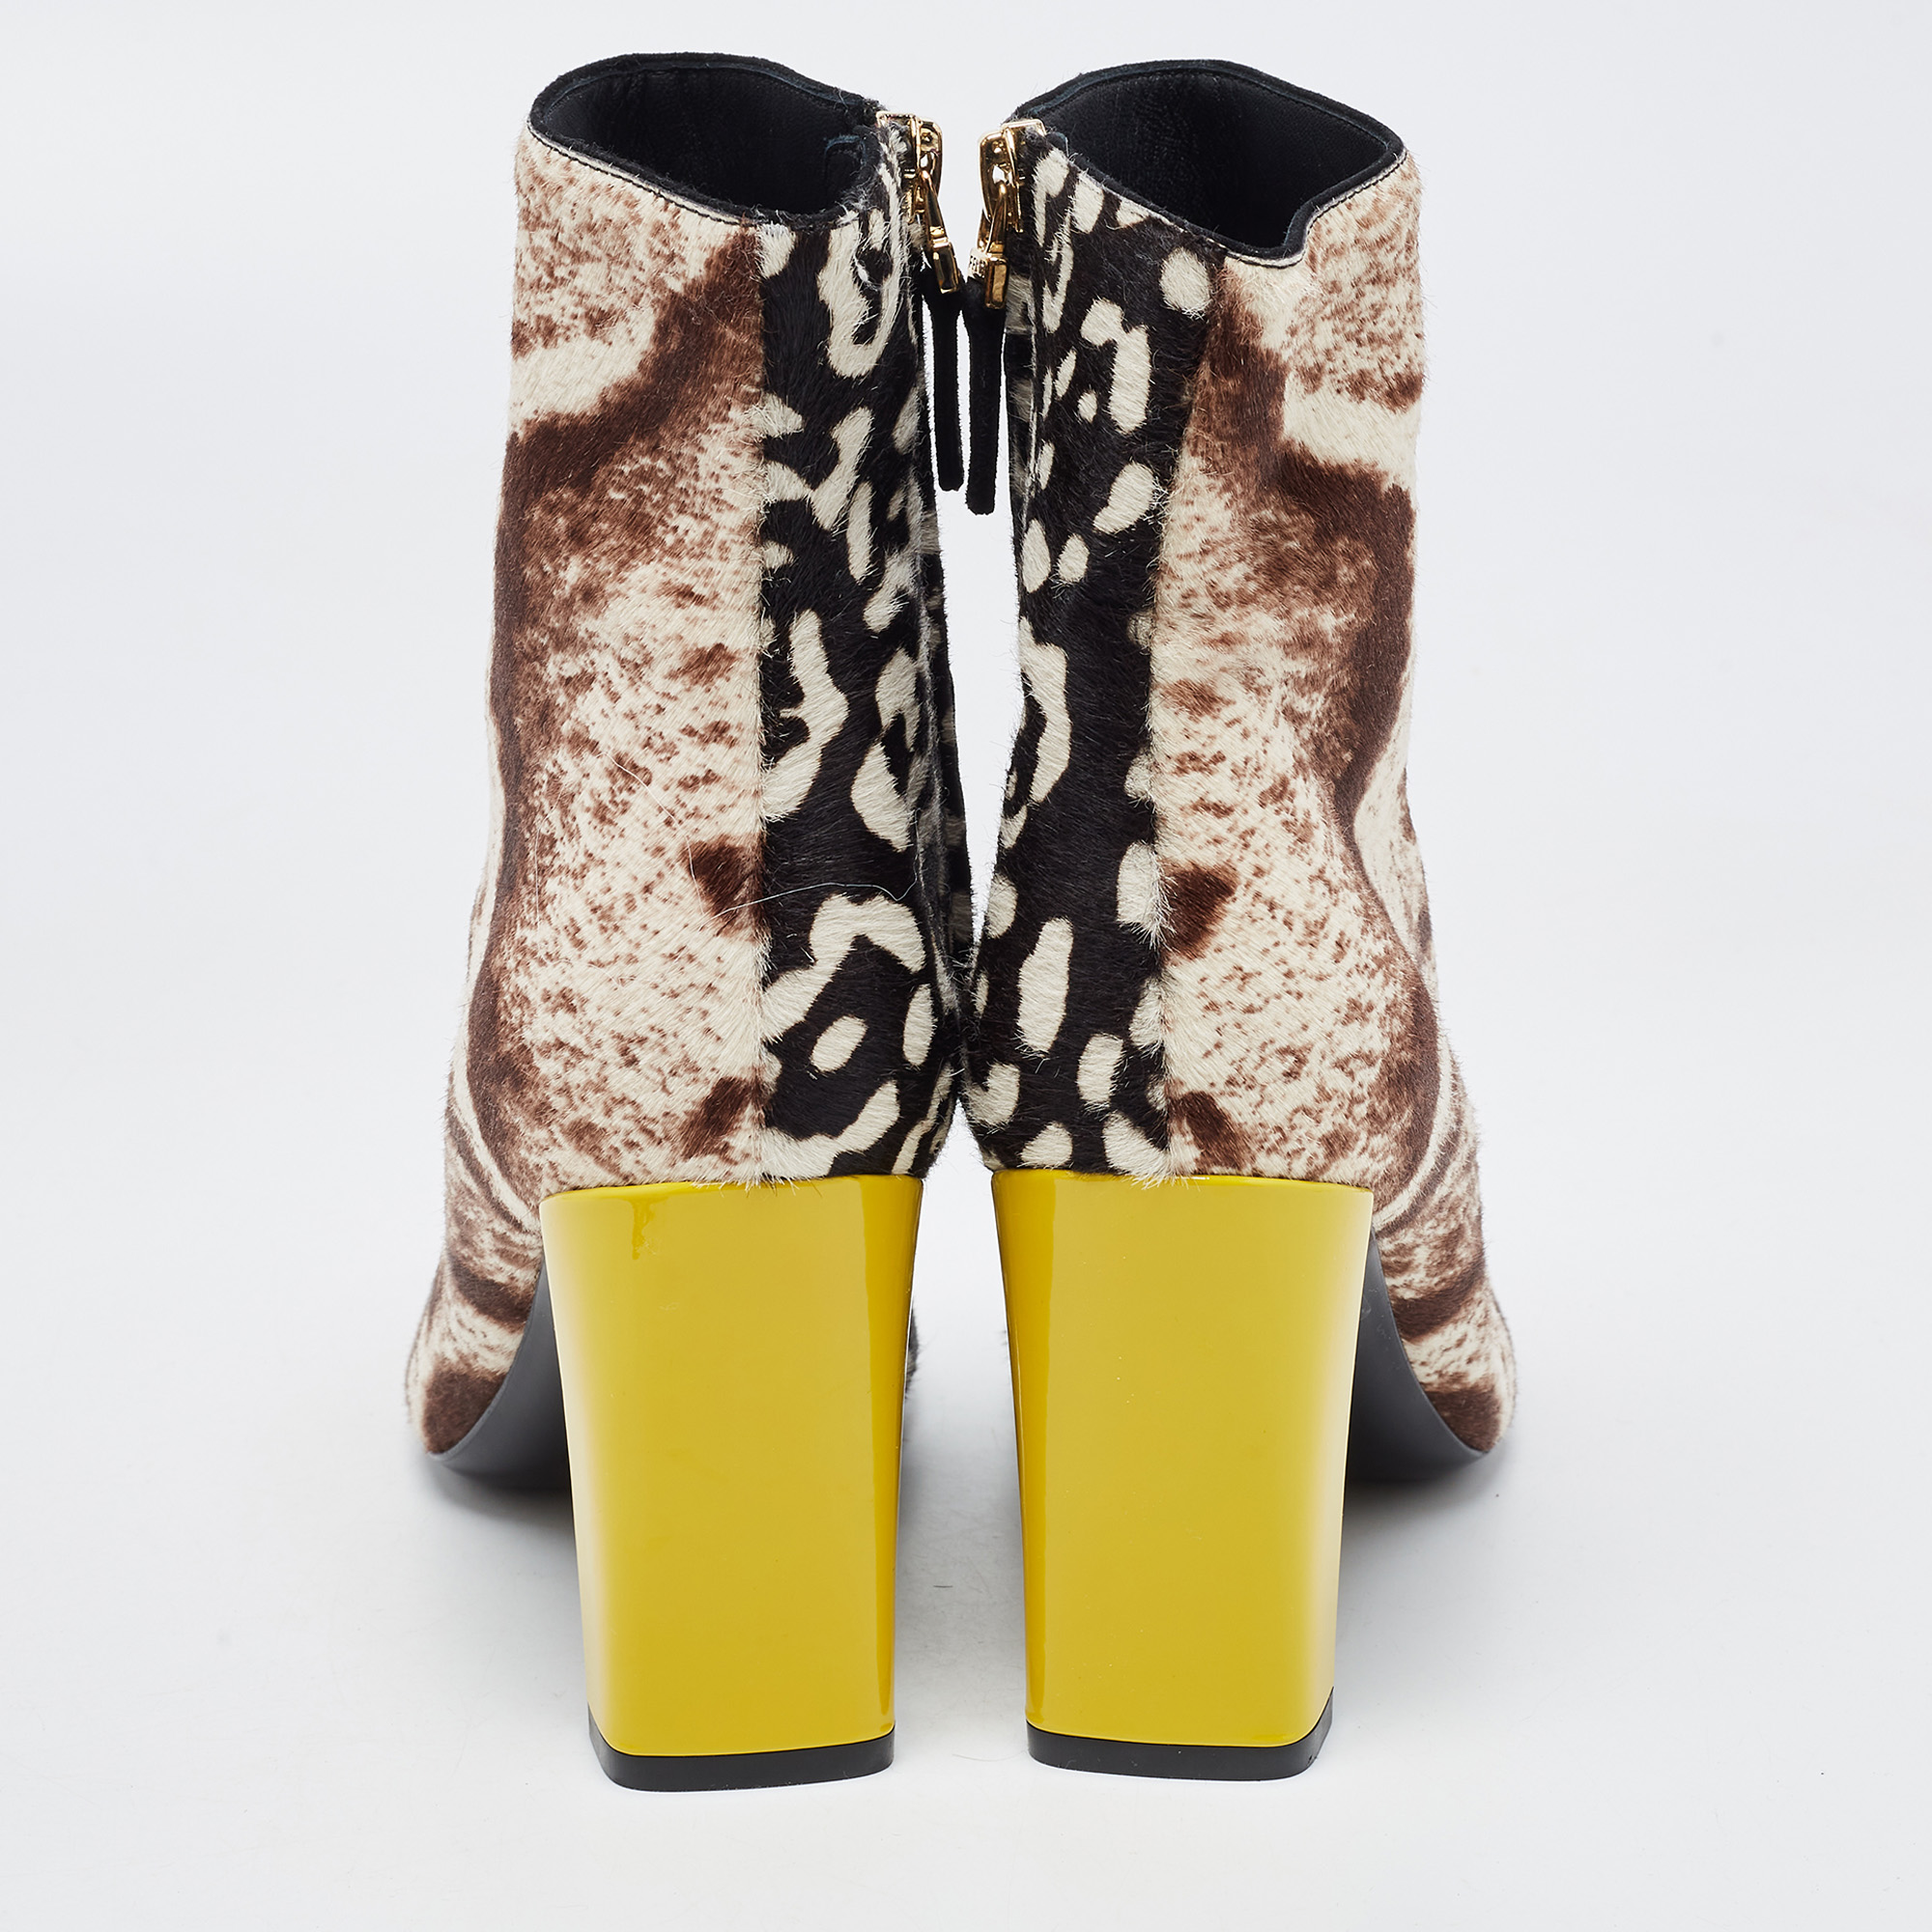 Fendi Tricolor Printed Calf Hair Ankle Booties Size 35